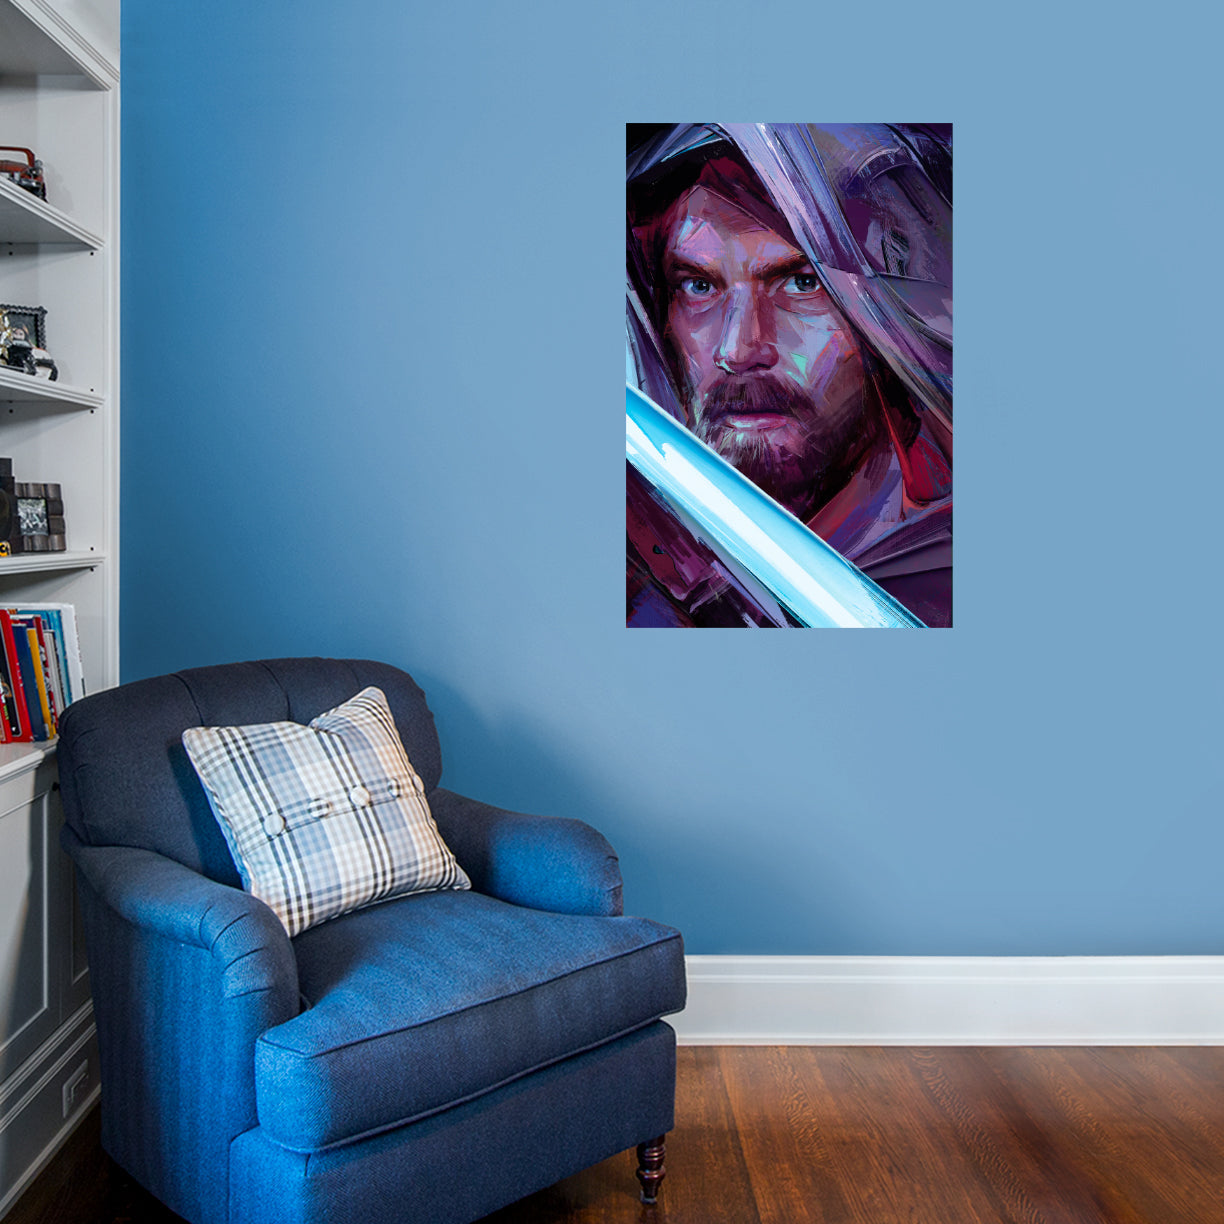 Obi-Wan Kenobi: Obi-Wan Close-up Poster - Officially Licensed Star Wars Removable Adhesive Decal